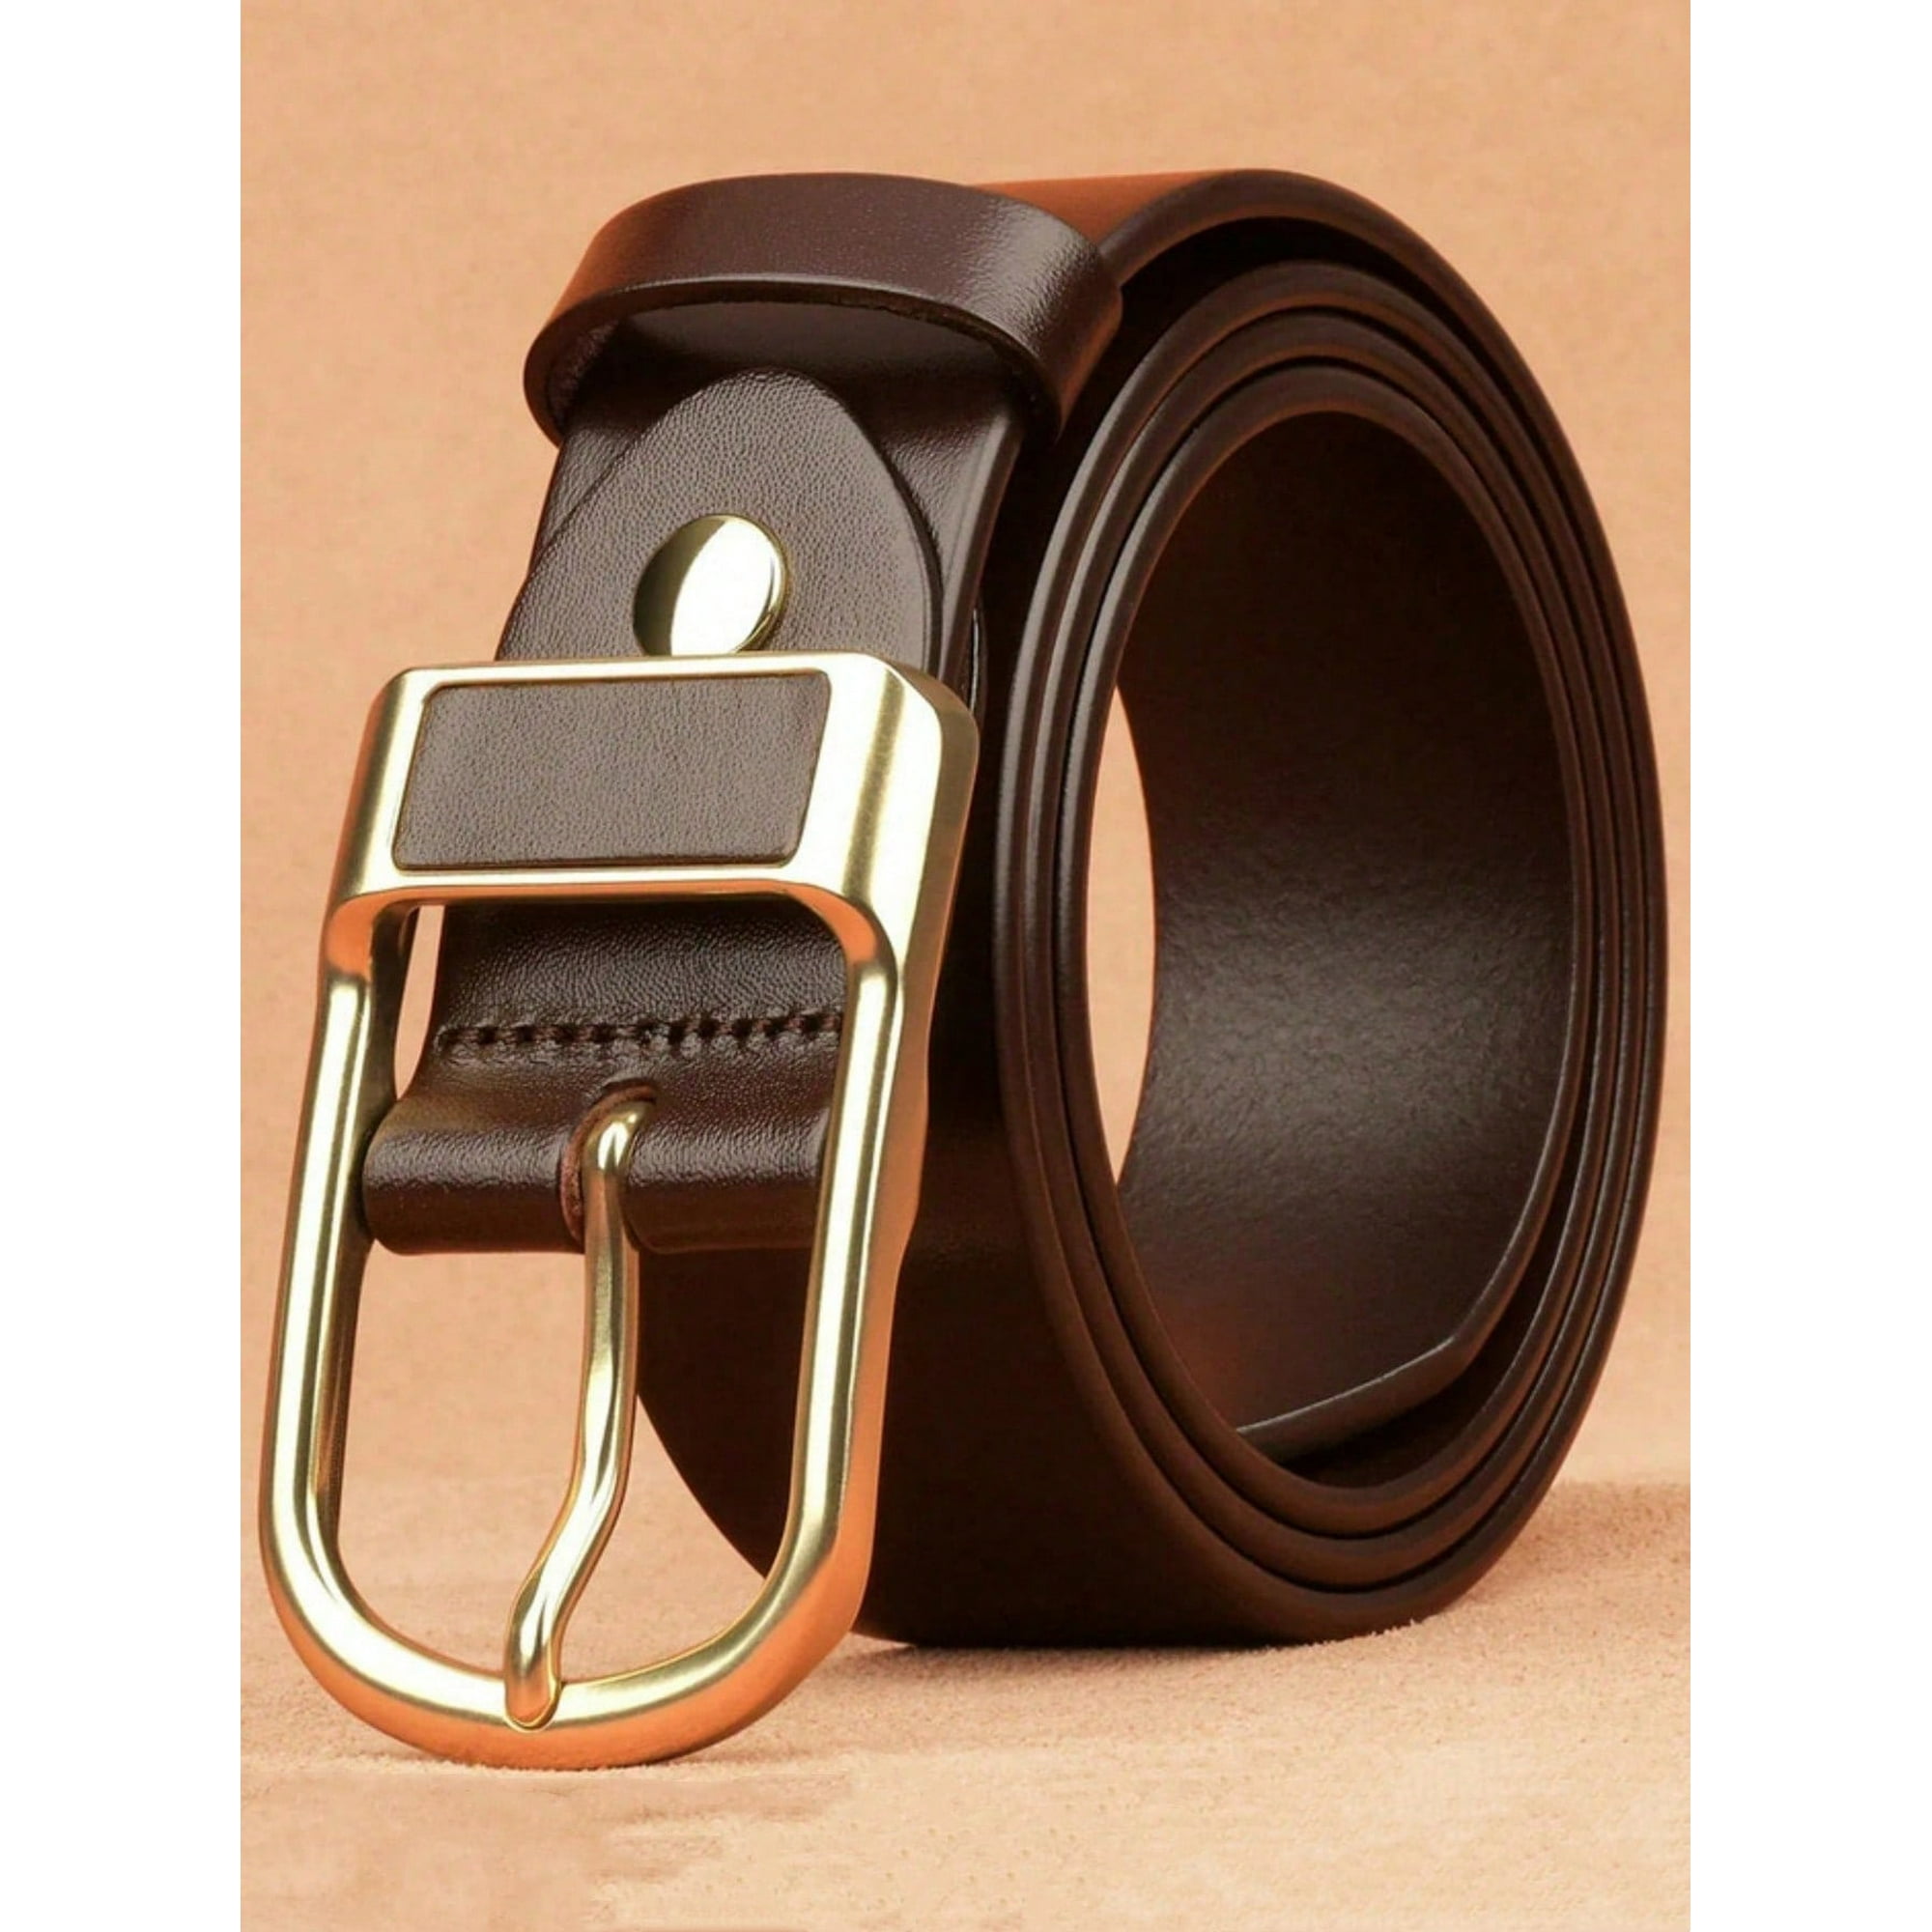 1pc vintage buckle pu leather belt for men, casual &amp; business, fits jeans and dress pants